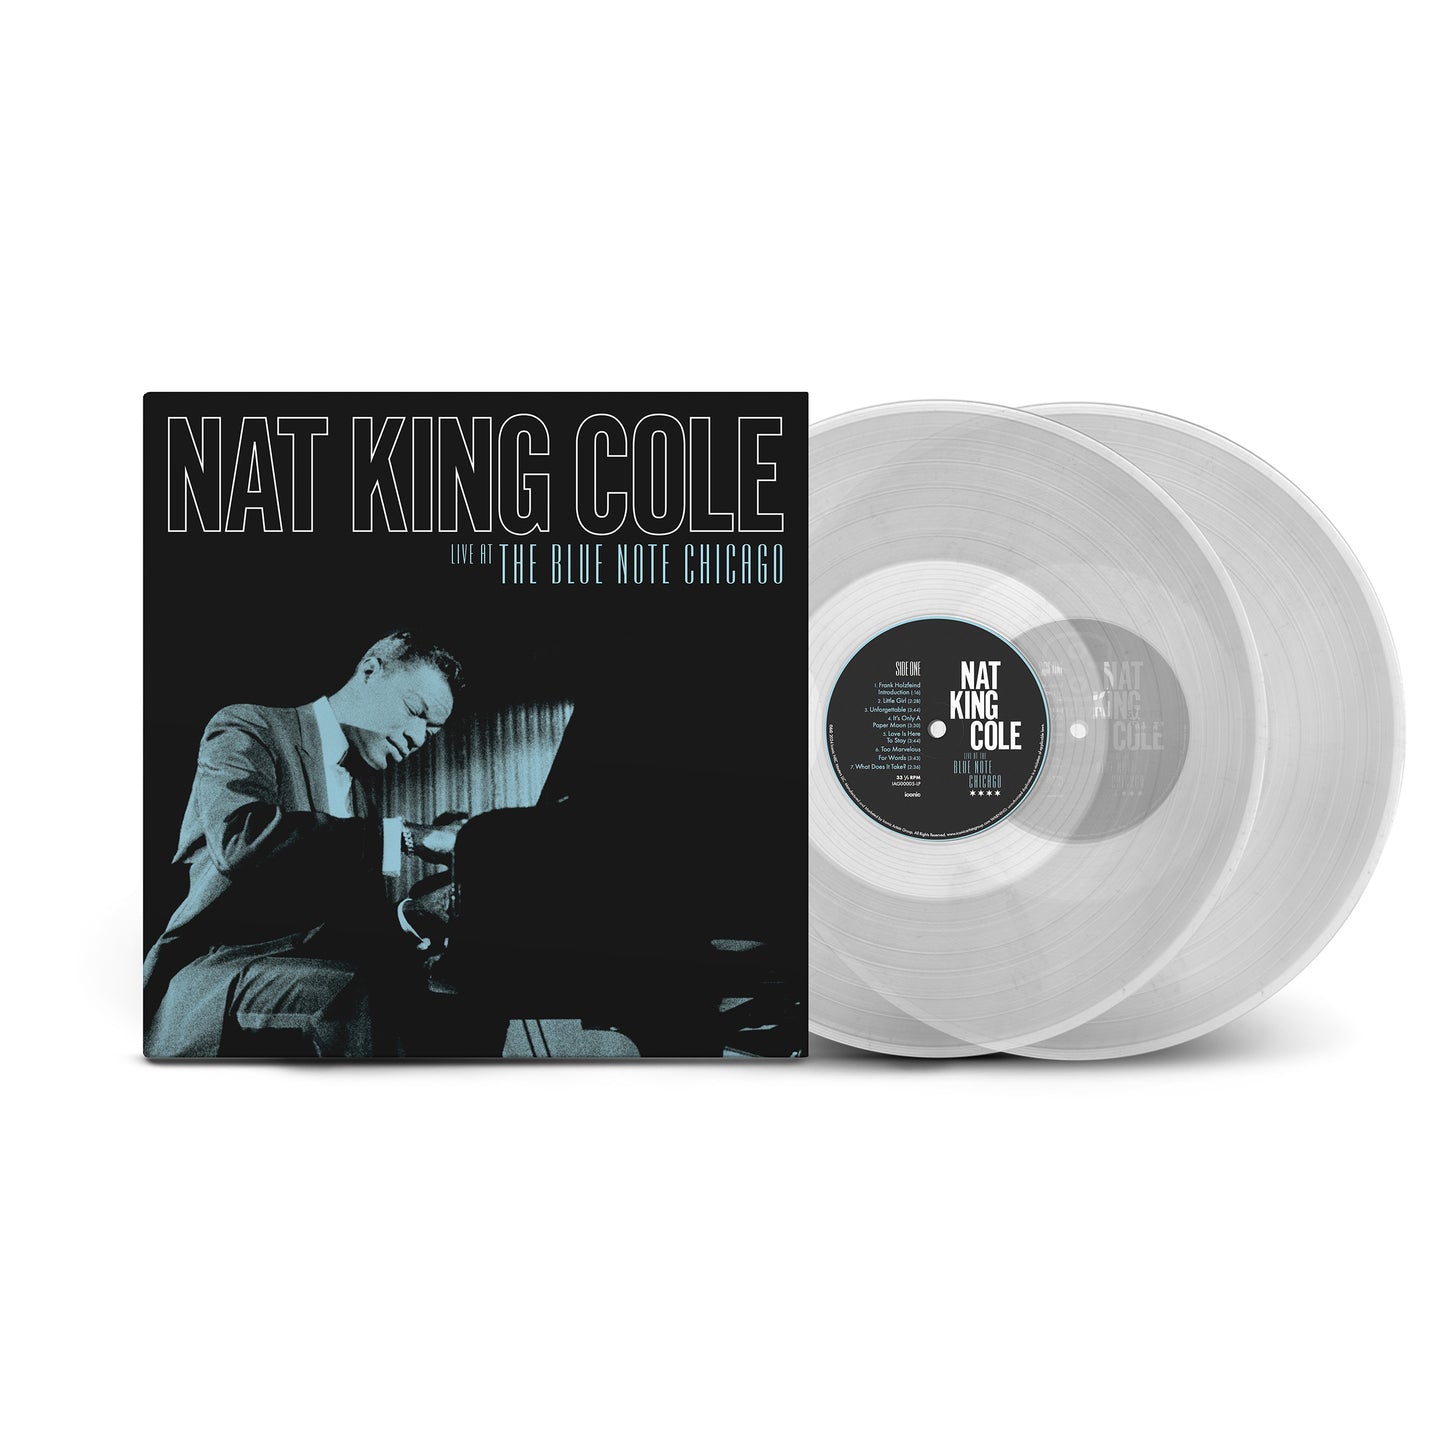 LIVE AT THE BLUE NOTE CHICAGO - CLEAR VINYL (140G, 2LP)